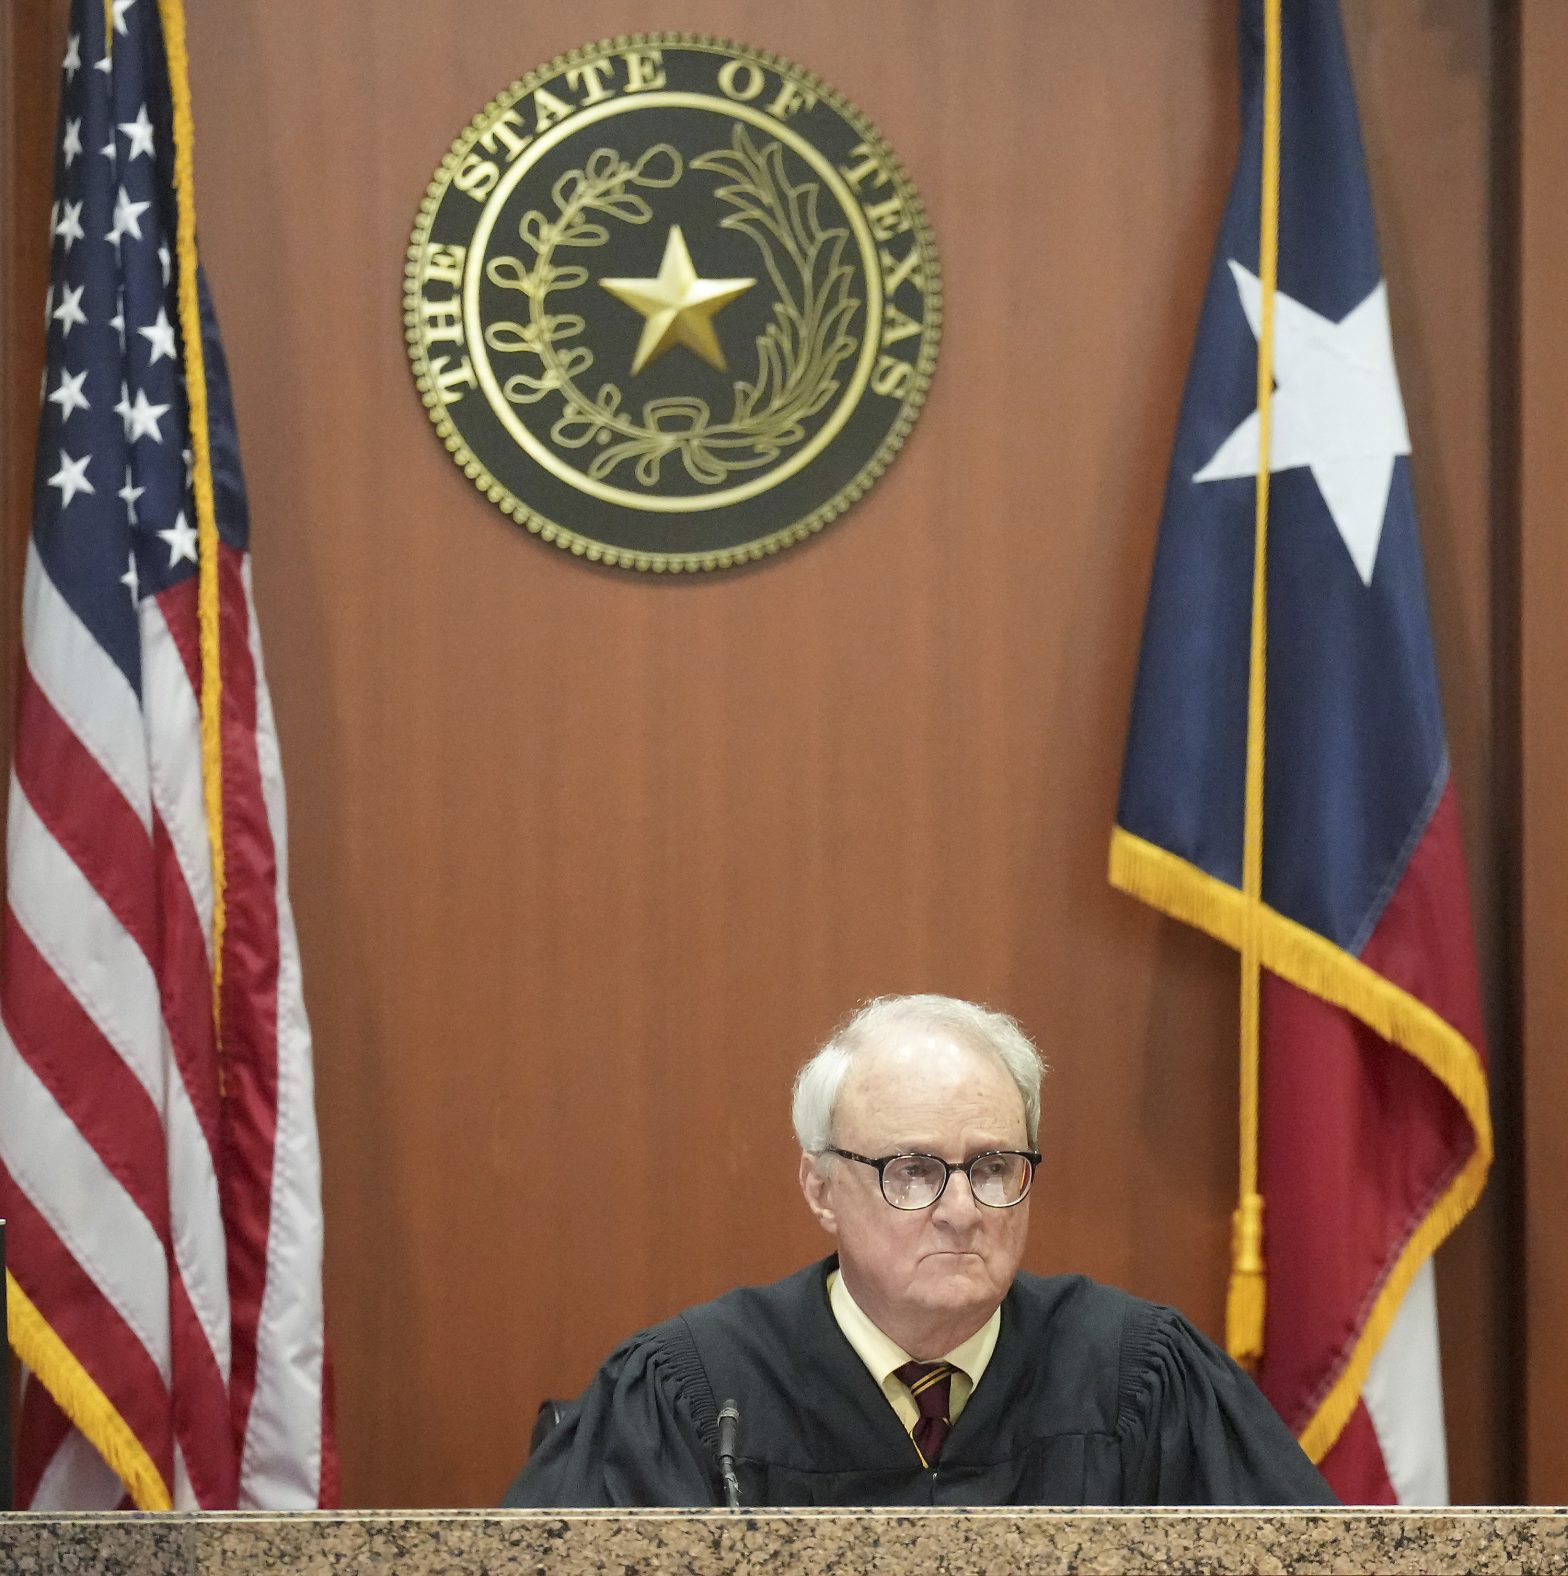 Texas Judge Rules Against GOP Lawsuit Seeking to Toss 2022 Election Result in Houston Area